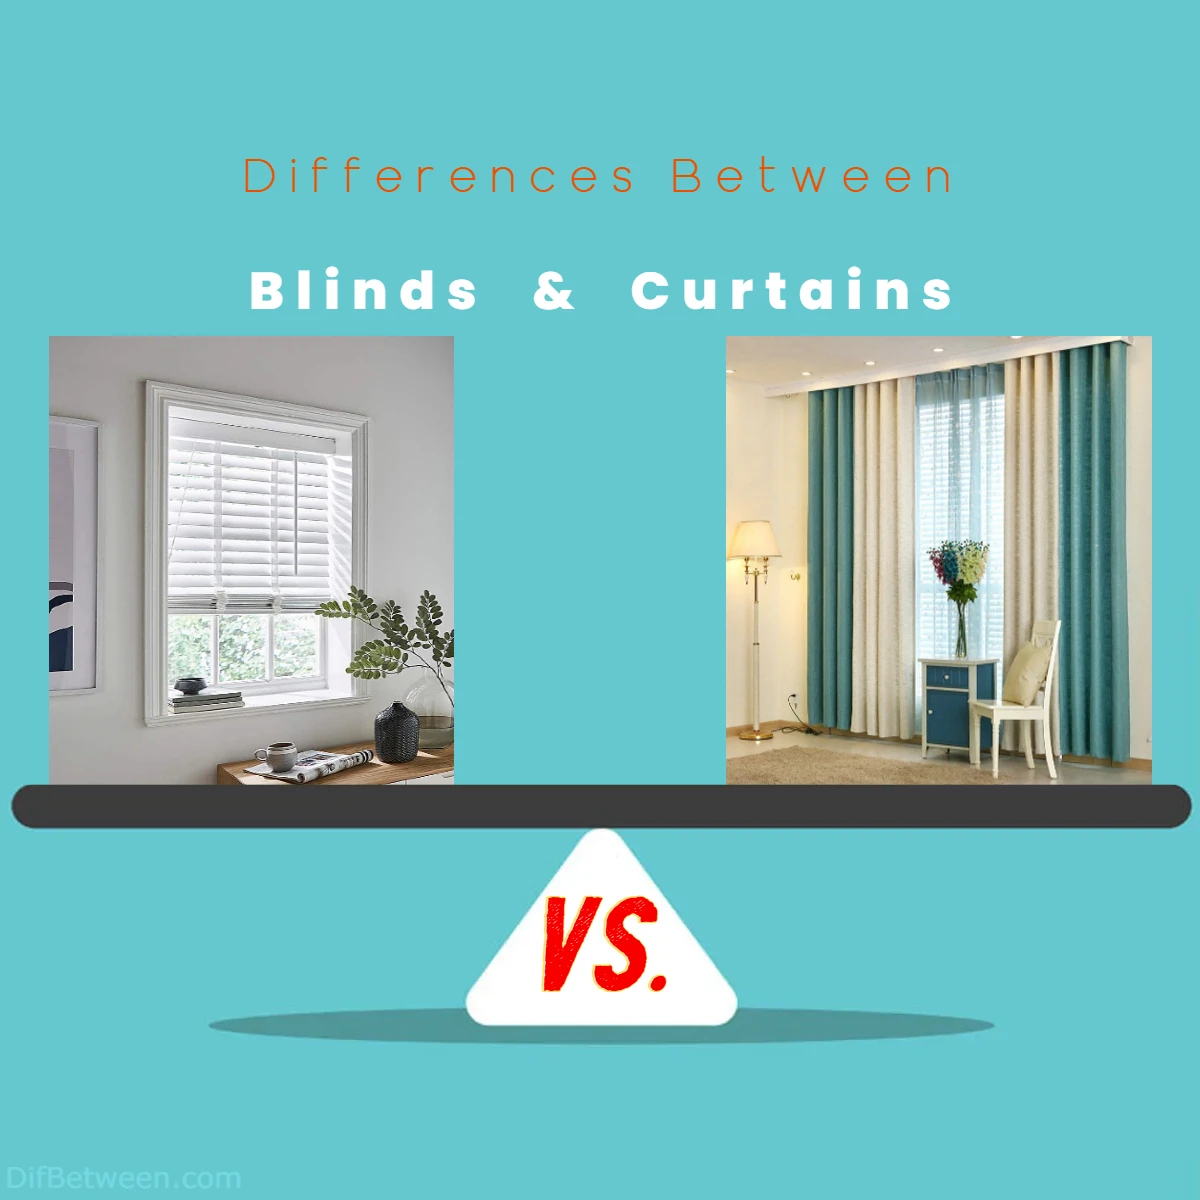 Differences Between Blinds vs Curtains